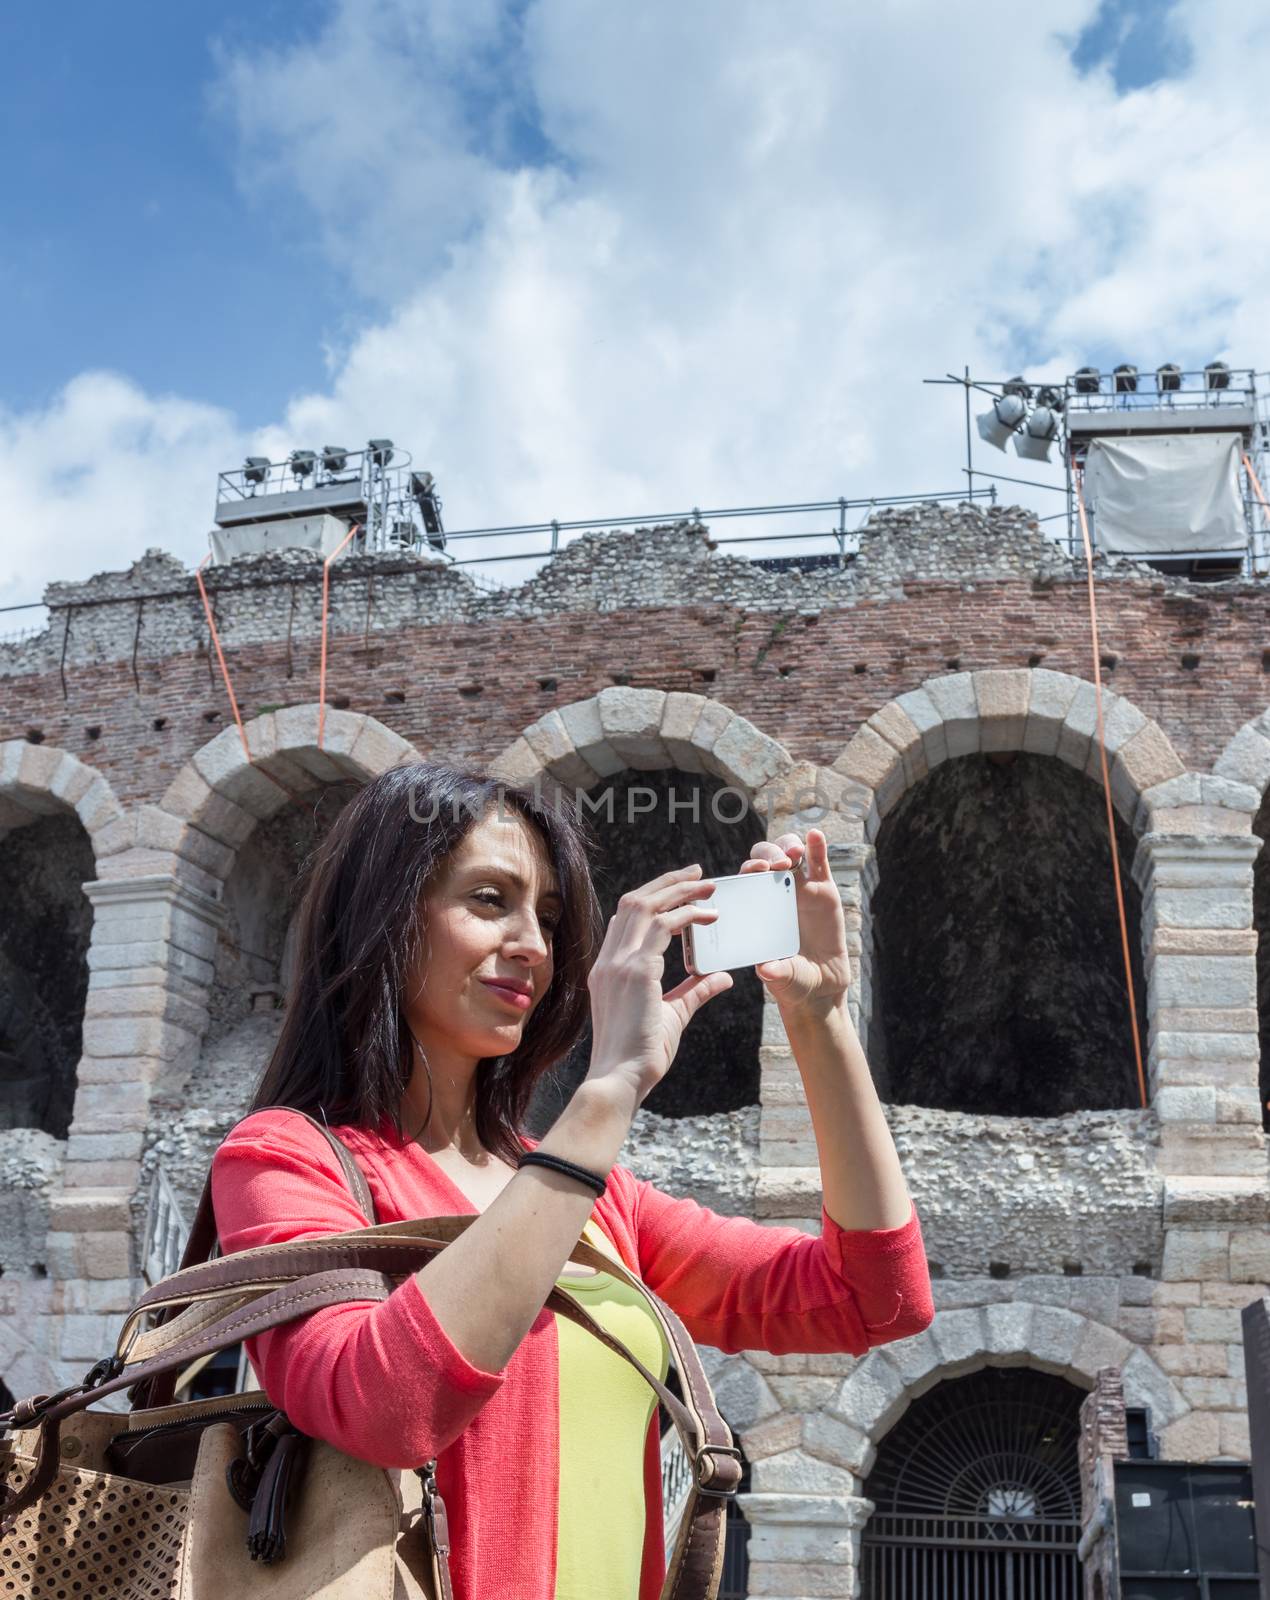 Female tourist taking a photo with mobile phone while sightseeing the city of Verona (Italy) with famous Arena on background. Shallow DOF.